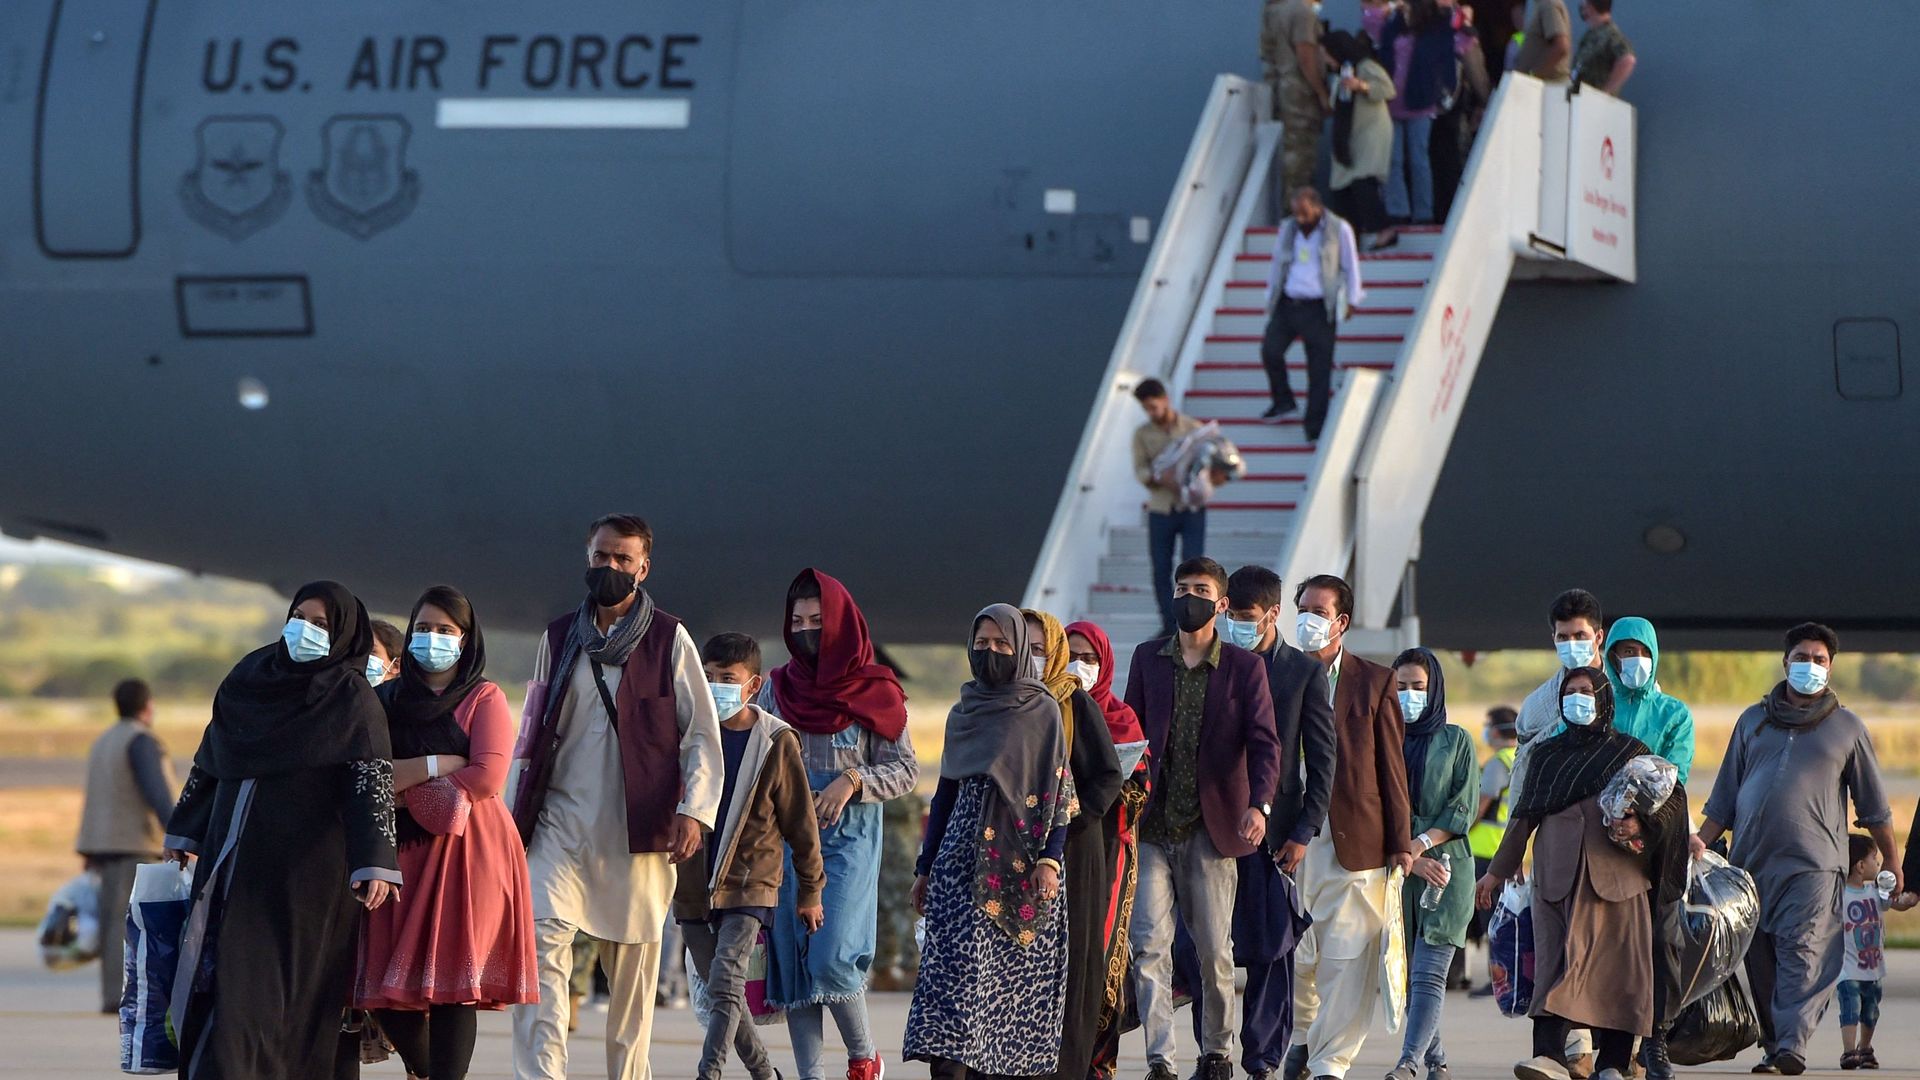 Refugees disembark from a US air force aircraft after an evacuation flight from Kabul at the Rota naval base in Rota, southern Spain, on August 31, 2021.